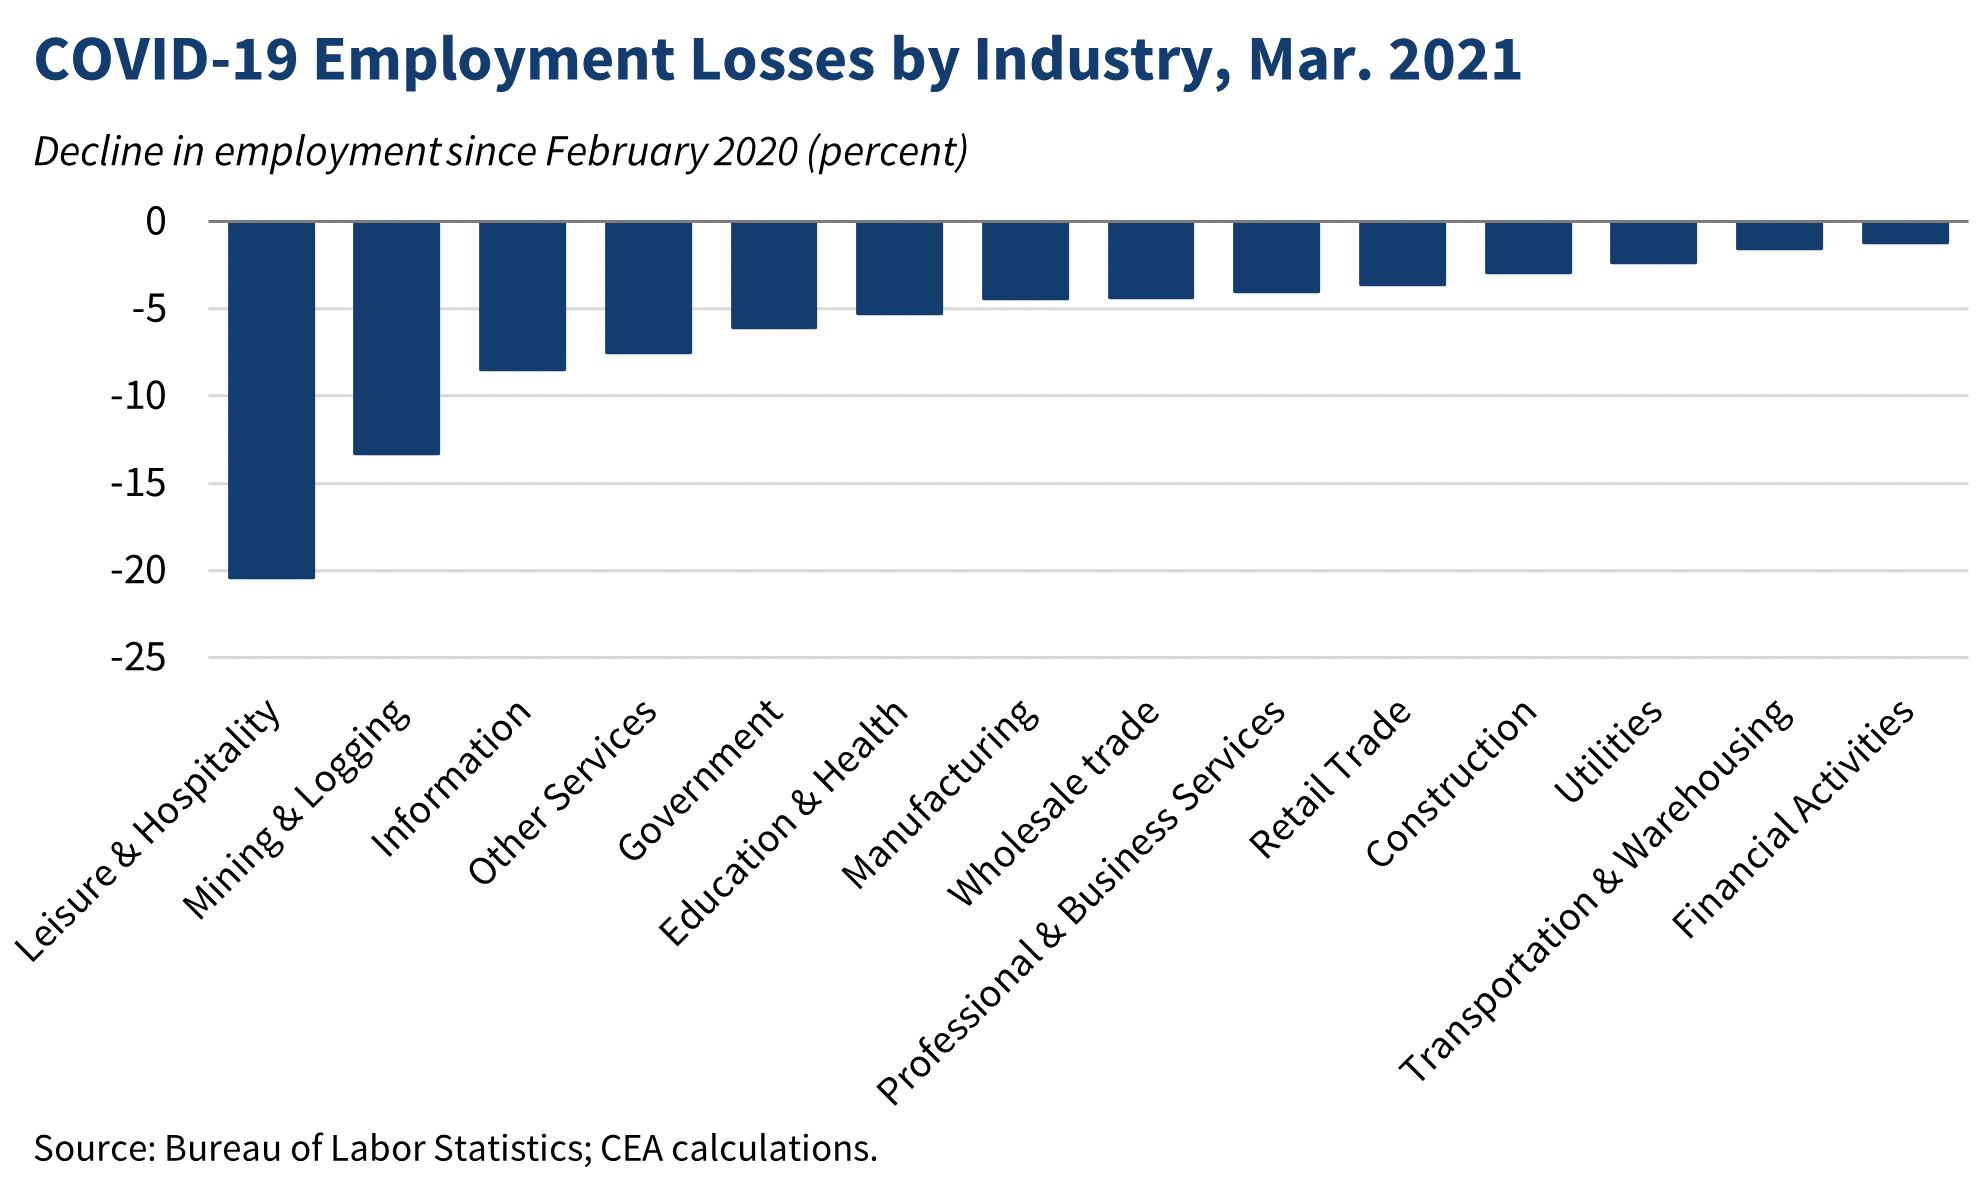 COVID-19 Employment Losses by Industry, Mar. 2021.